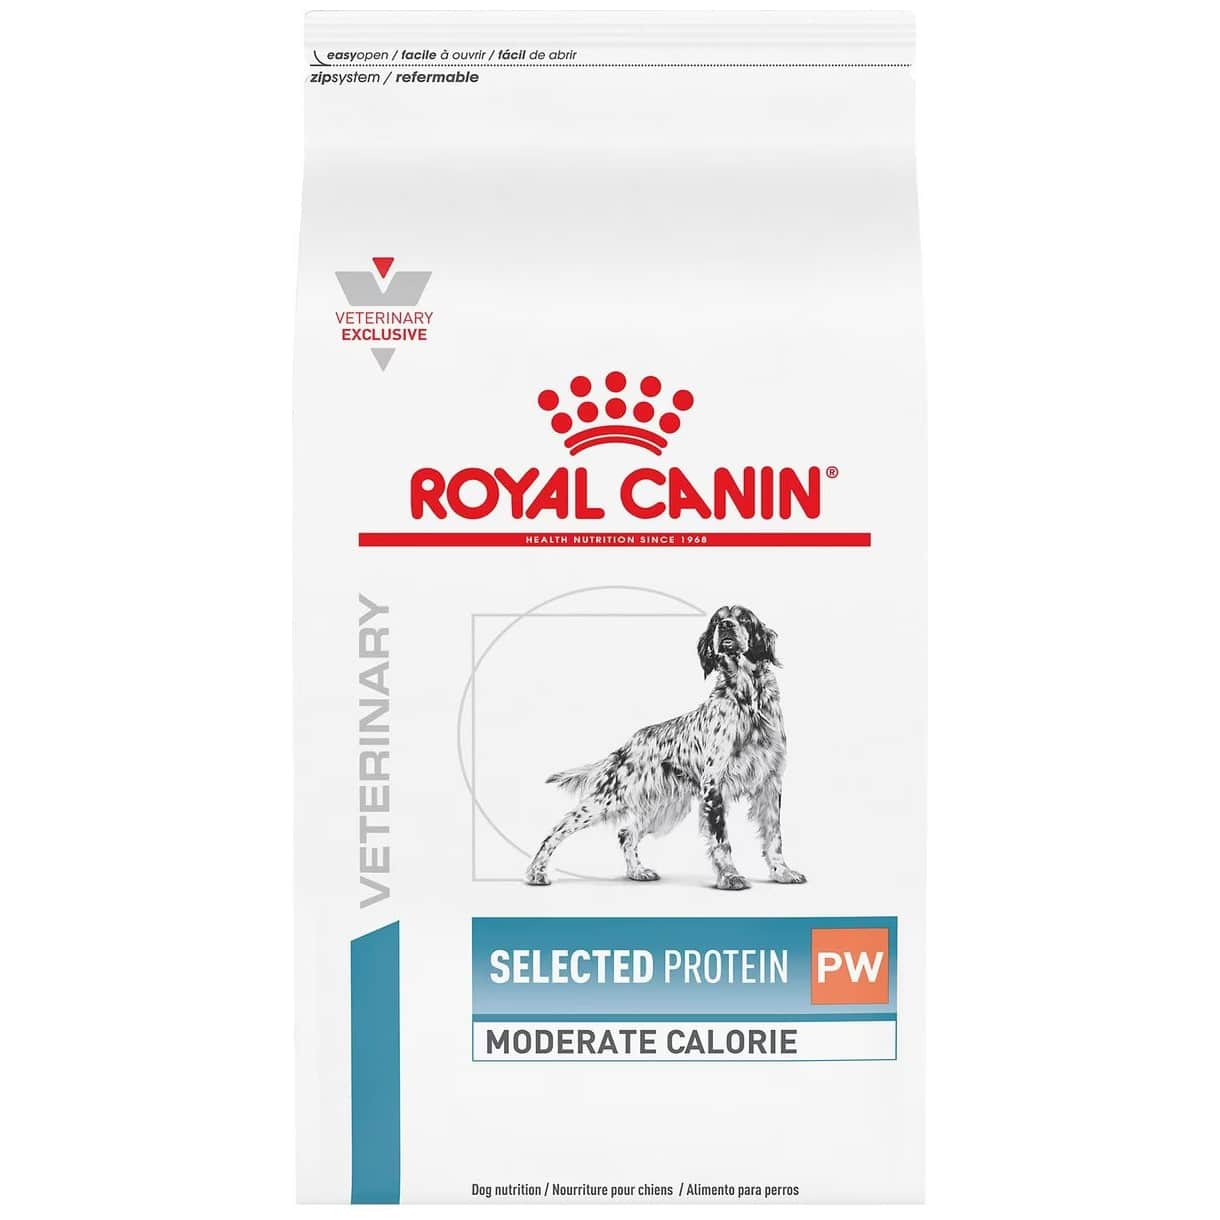 Royal Canin Veterinary Diet Adult Selected Protein PW Moderate Calorie Dry Dog Food